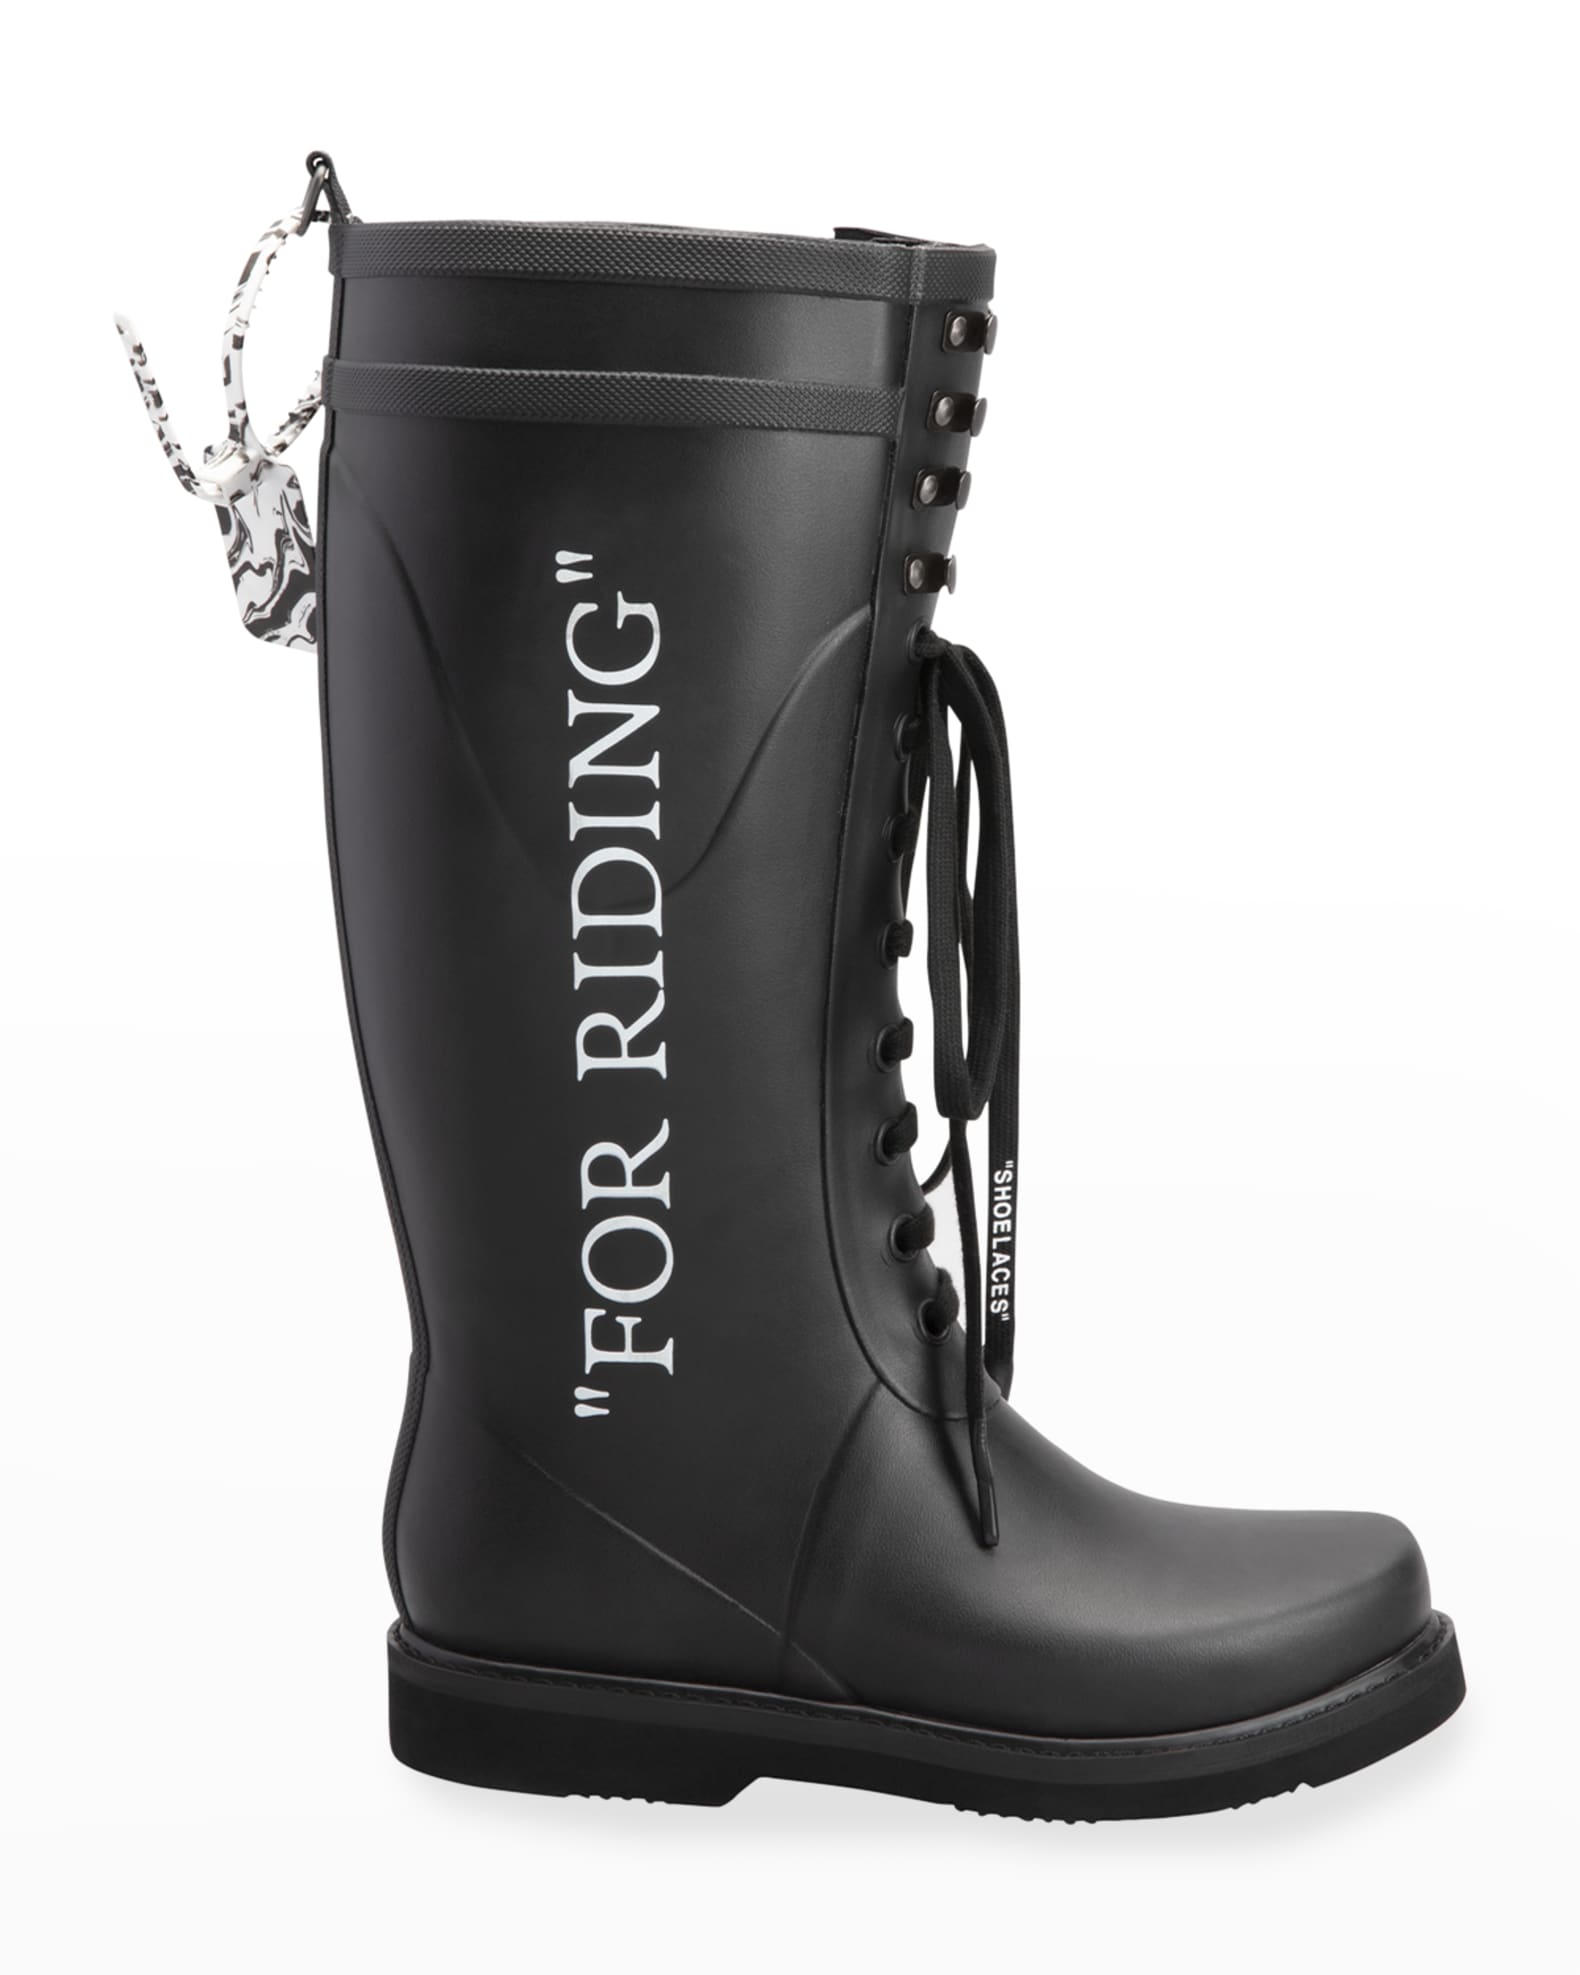 Off-White For Riding Lace-Up Rain Boots | Neiman Marcus